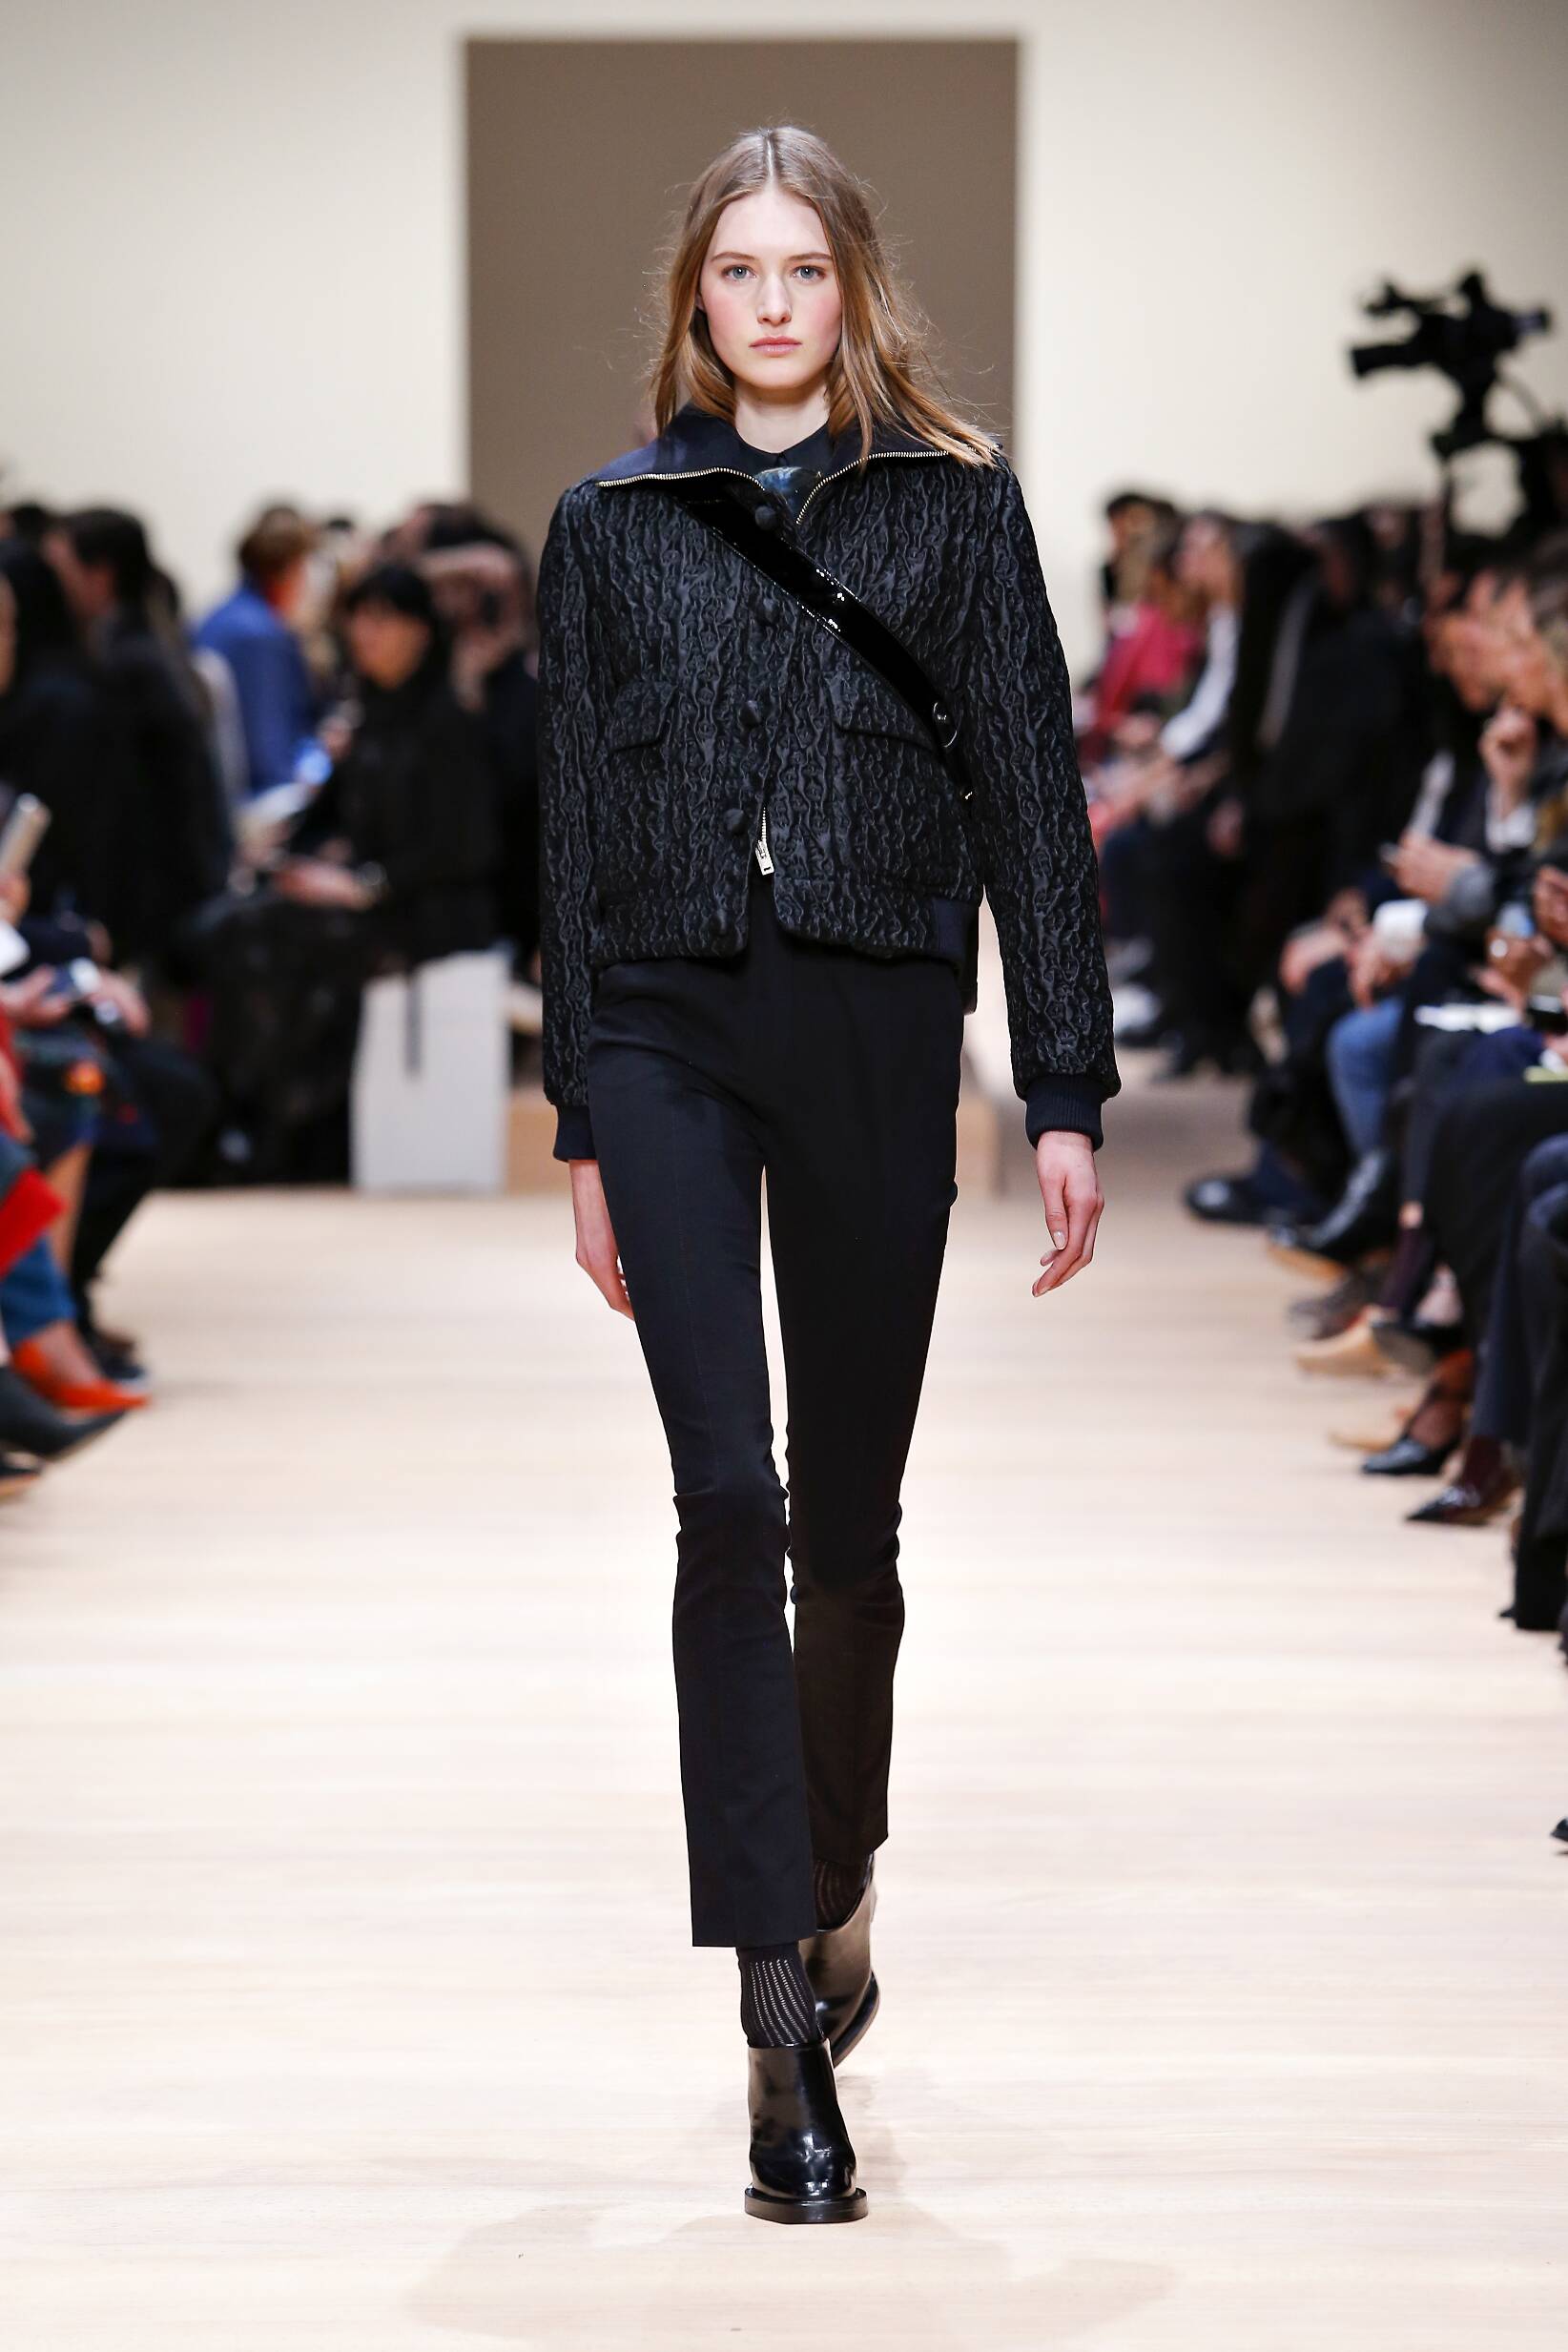 Carven Collection Fall 2015 Catwalk